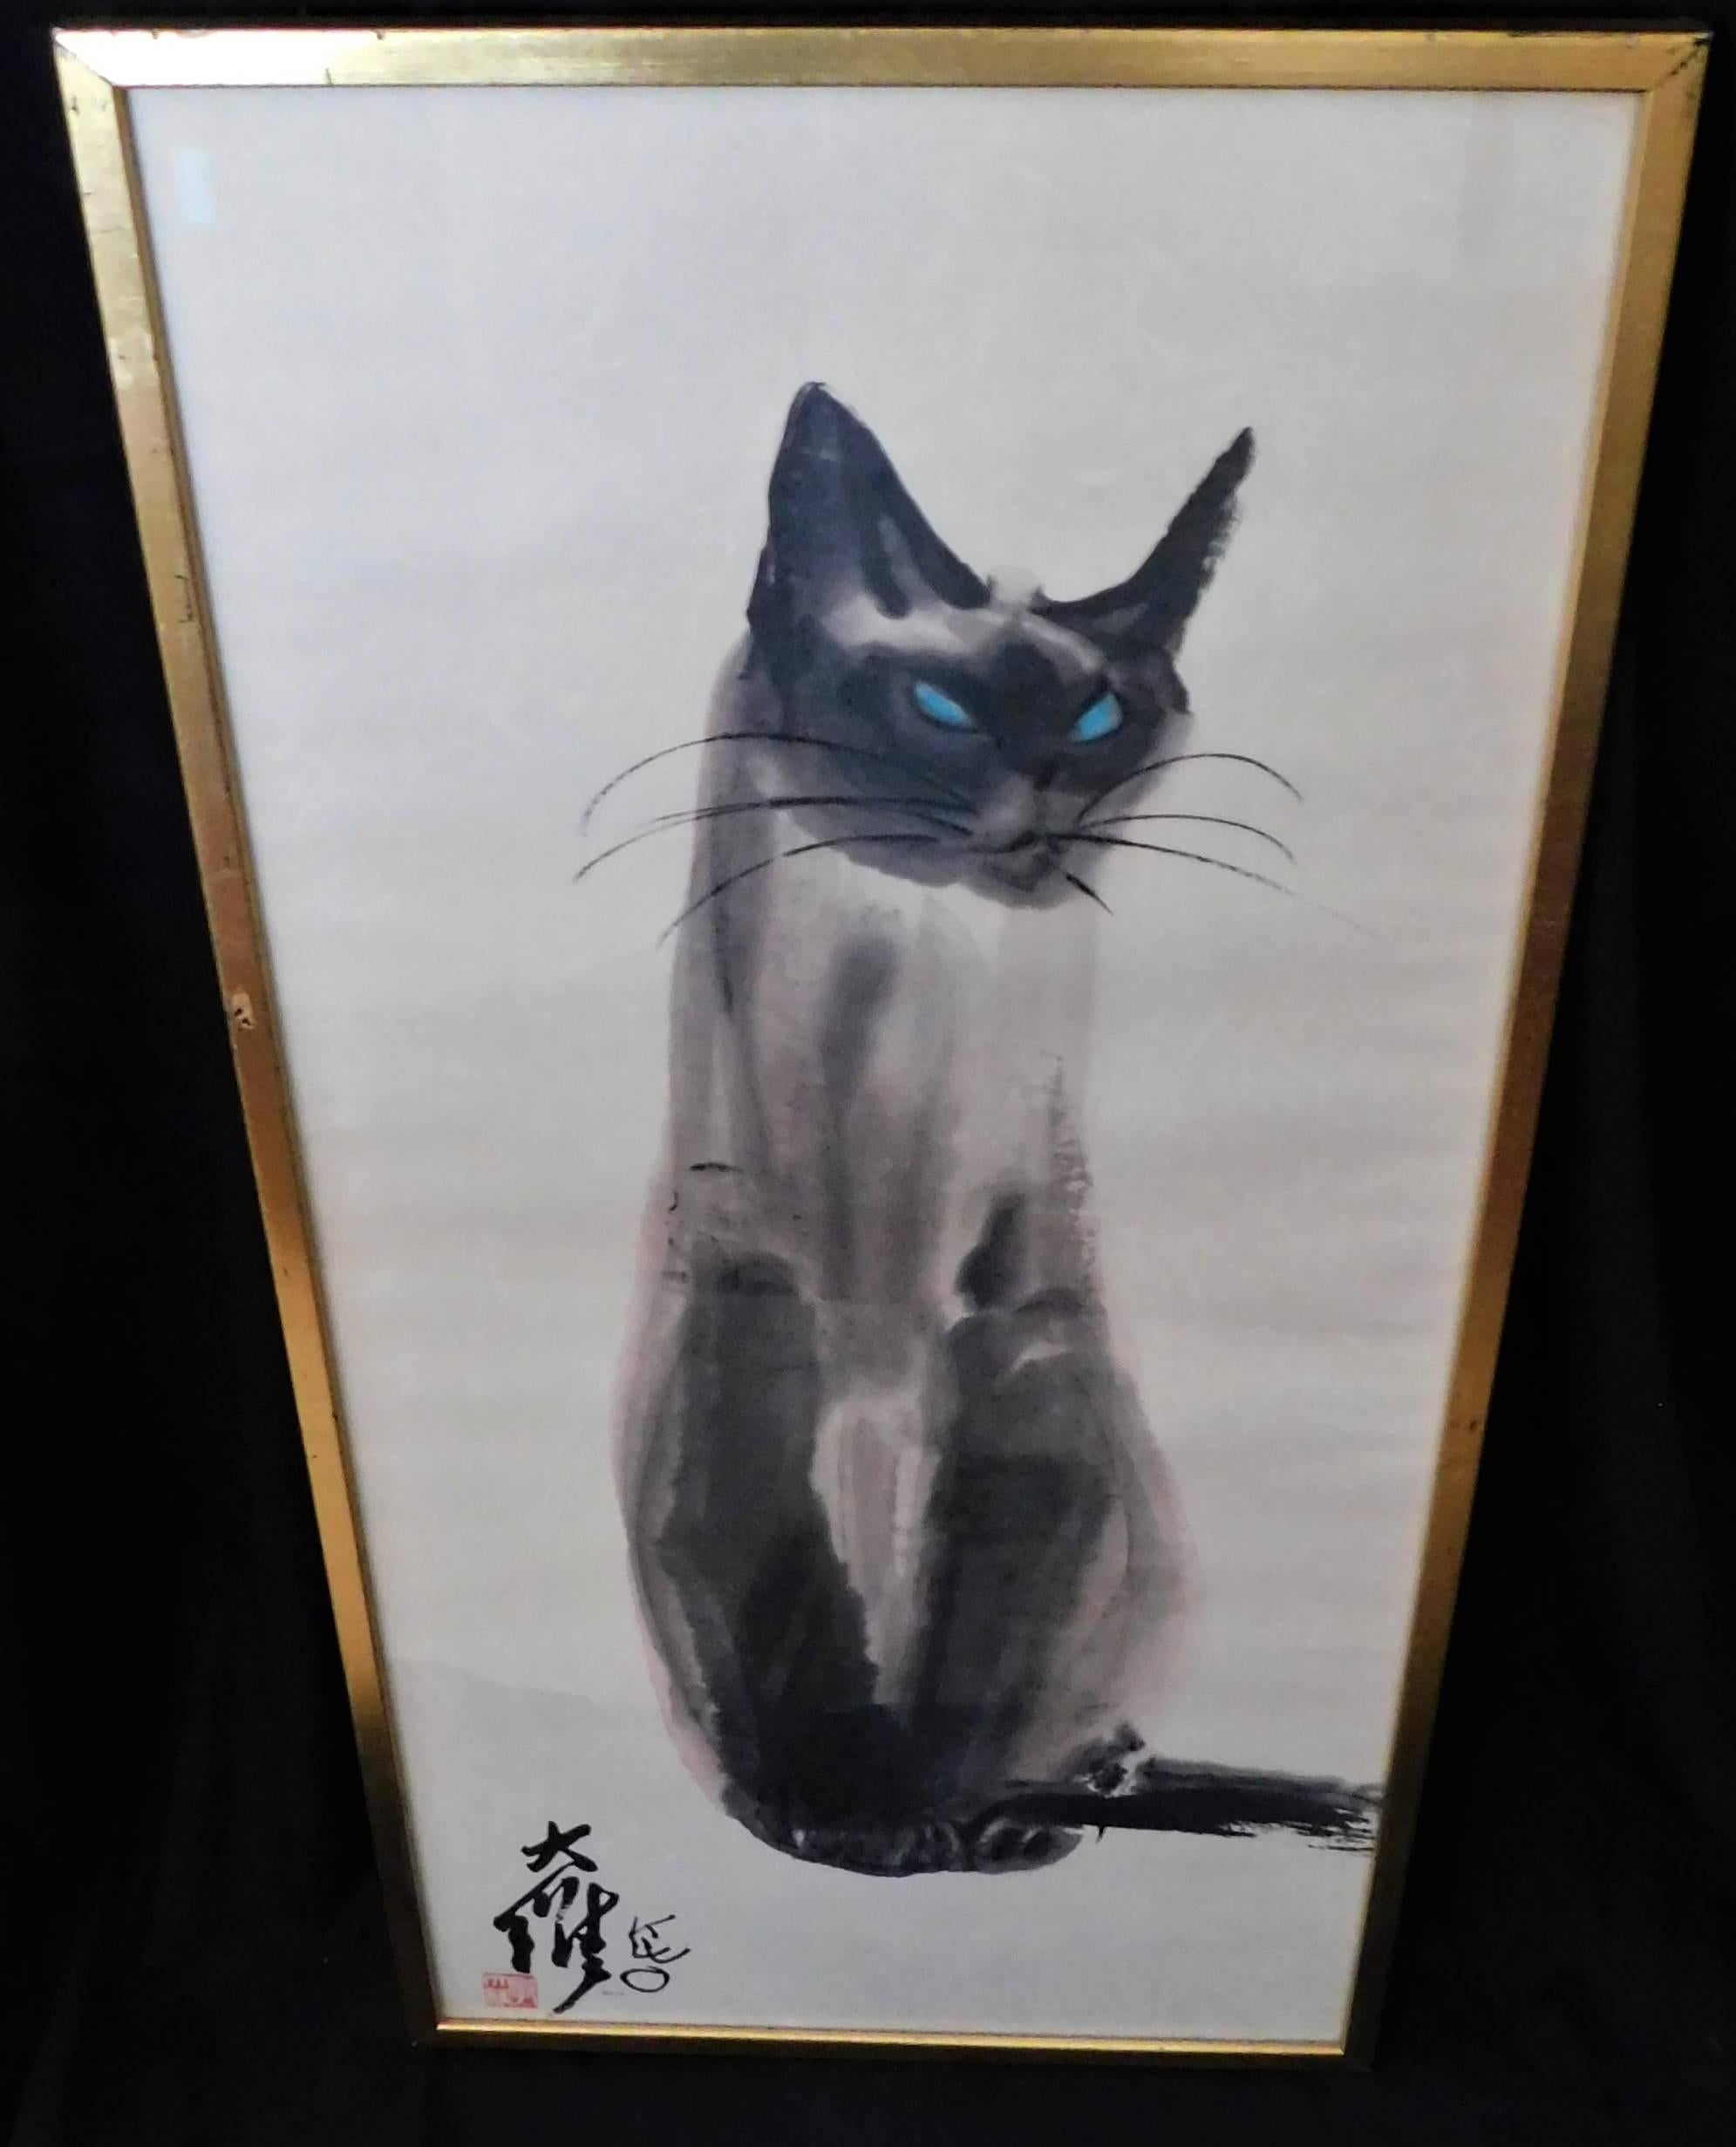 Artist and teacher Dr. David Kwo Da-Wei (1919-2003) became renowned for his Chinese brush paintings of his black cat, Kim. He also pioneered in using complete strokes to create impressionistic images. This limited edition lithogragh is stamped in